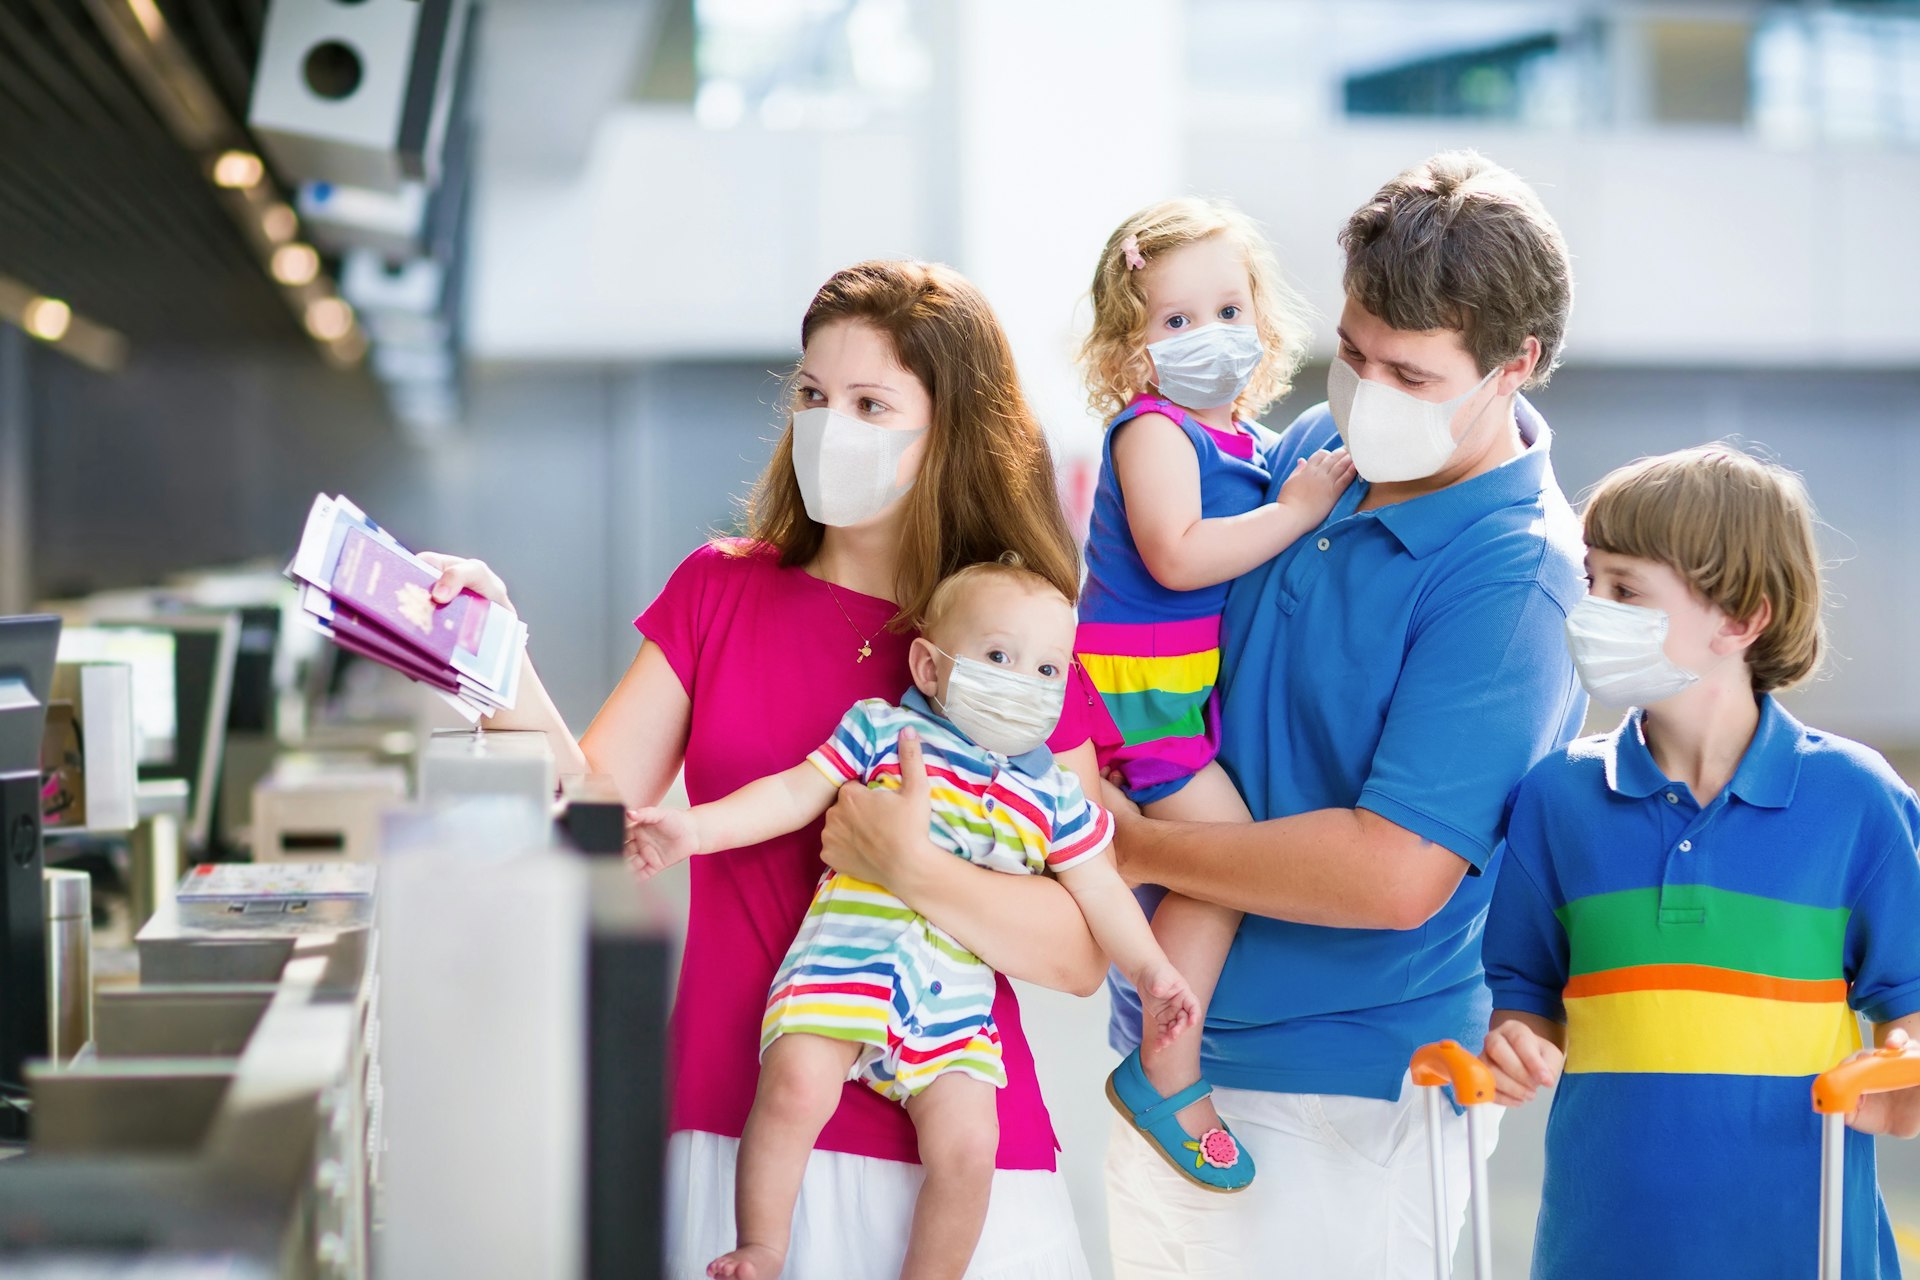 A picture of a family with three kids in the airport, all of them wearing face masks